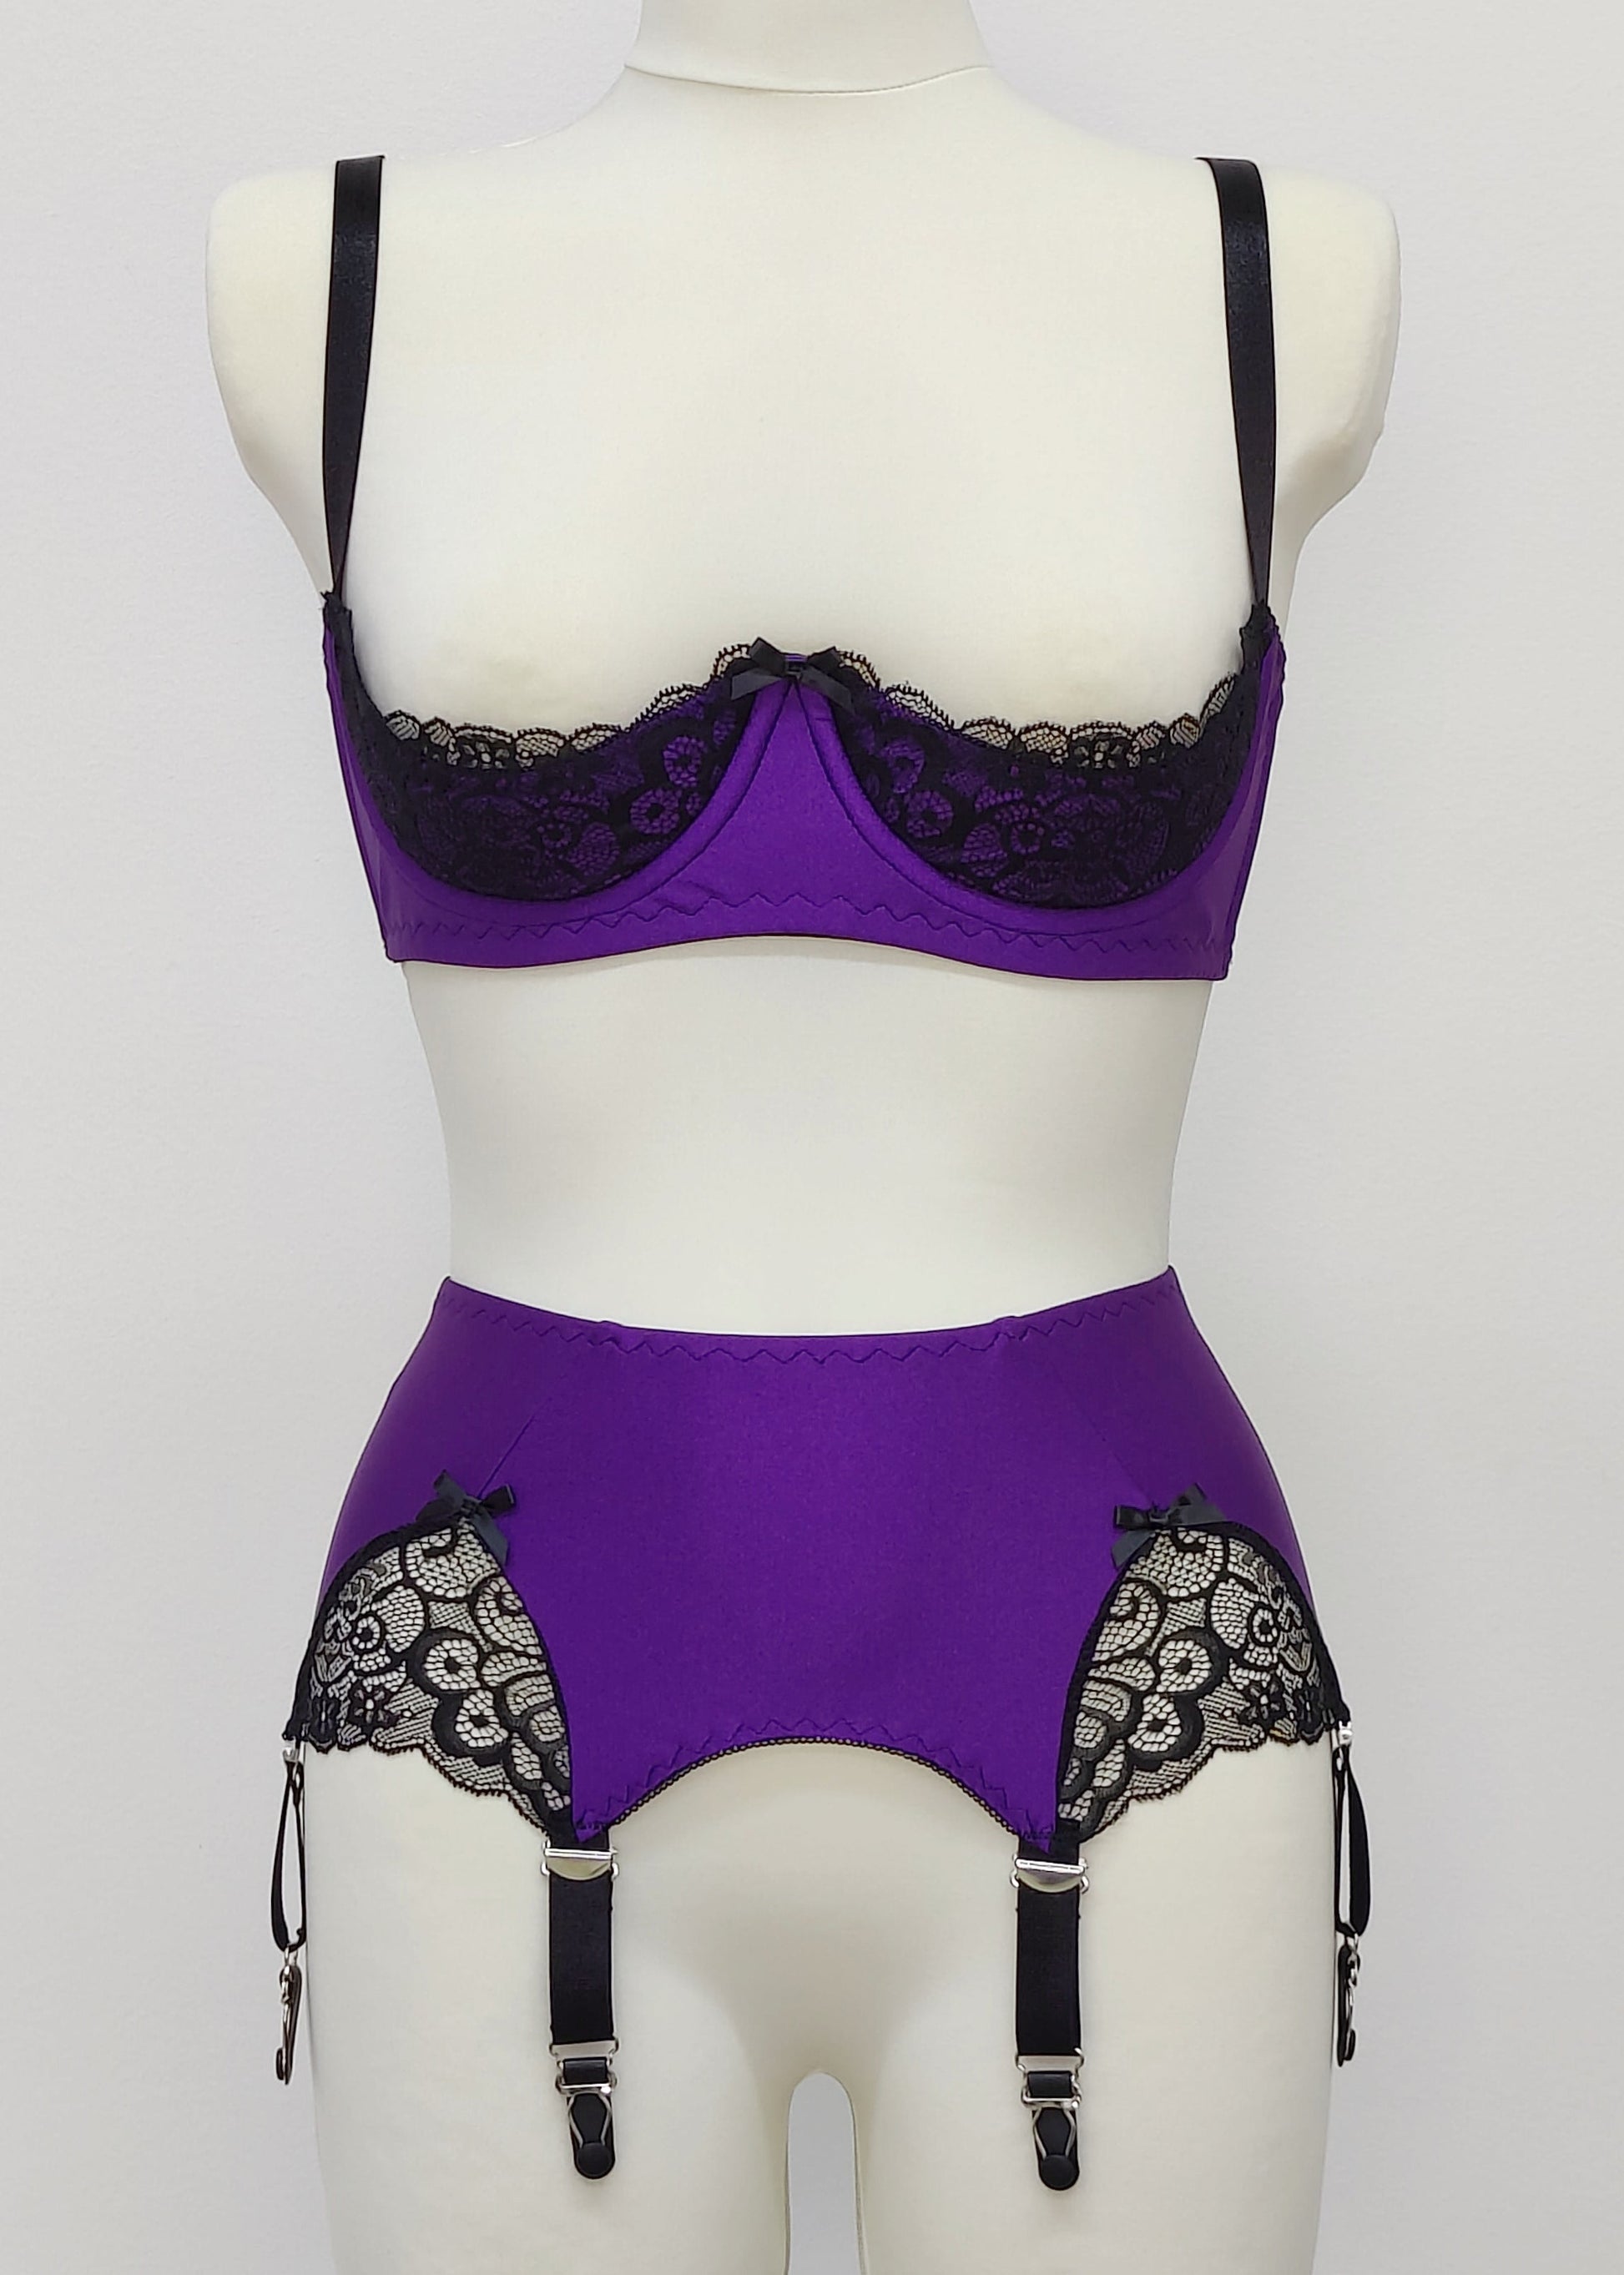 Purple LUCY Quarter cup bra with black lace and straps, size US 34C or EU 70C, in combination with matching garter belt